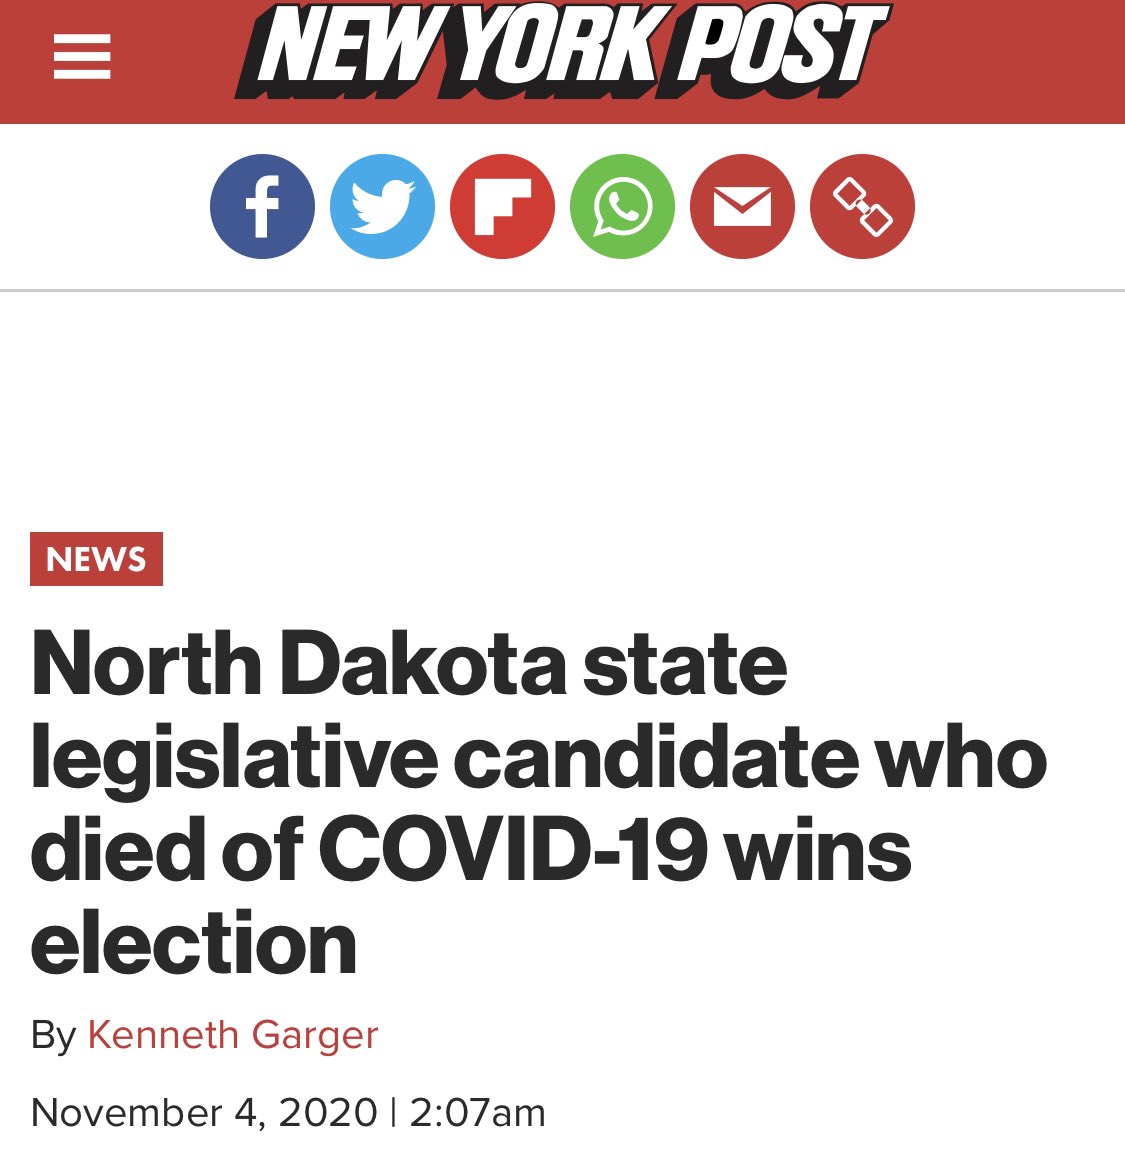 So, shout out to North Dakota for voting for a dead guy. really top notch stuff here guys. 